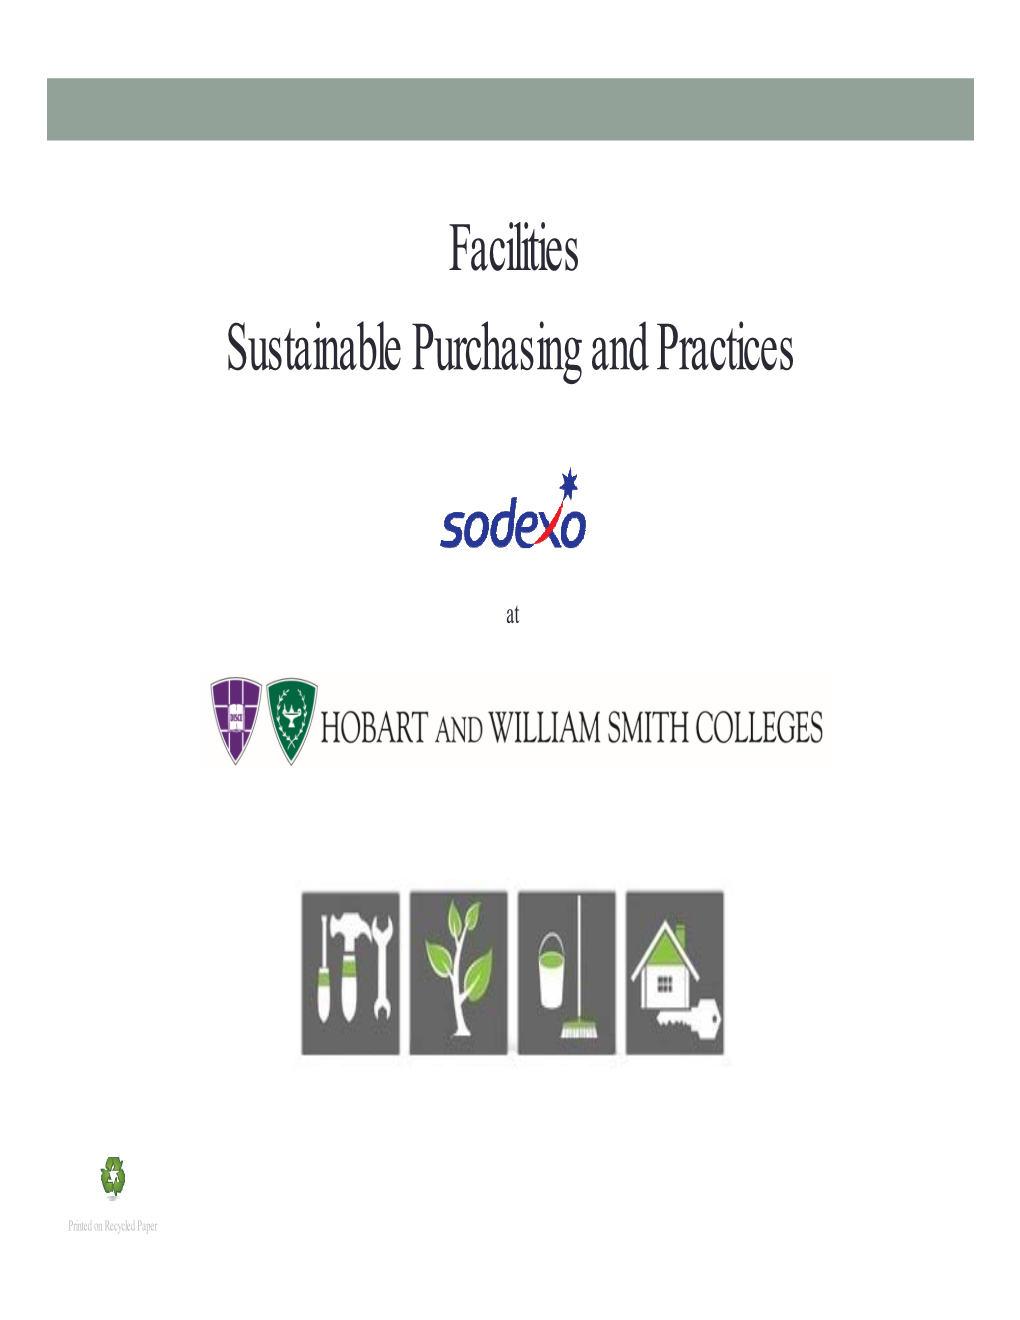 Facilities Sustainable Purchasing and Practices